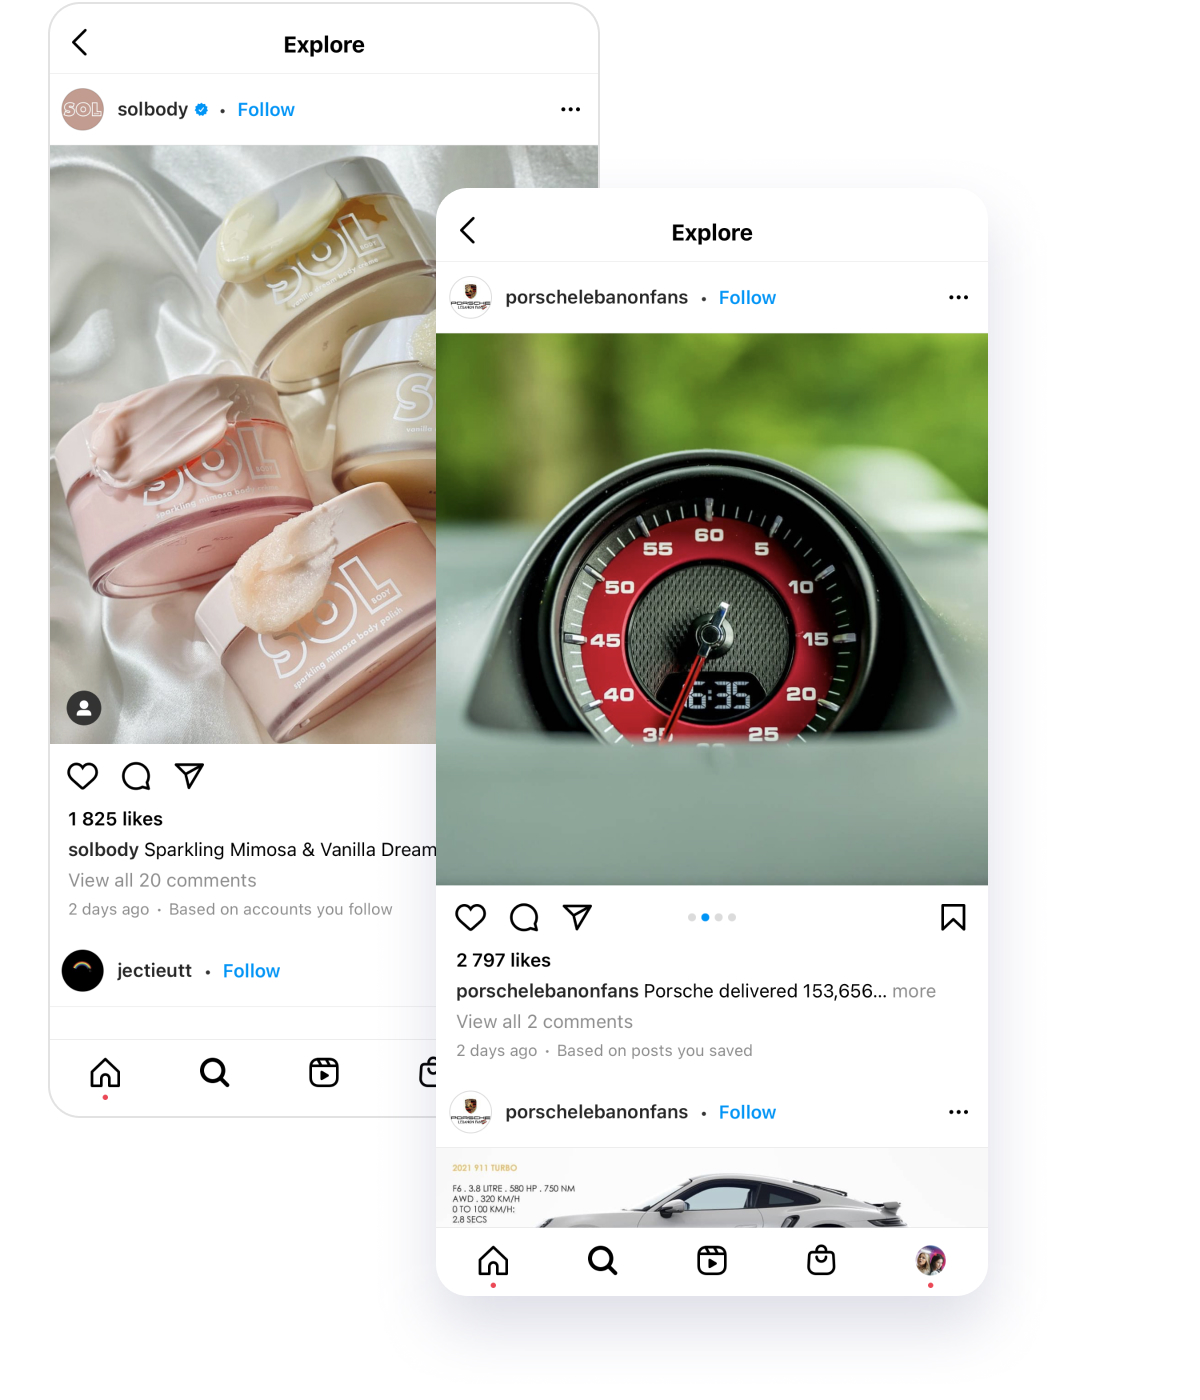 sell products through Instagram